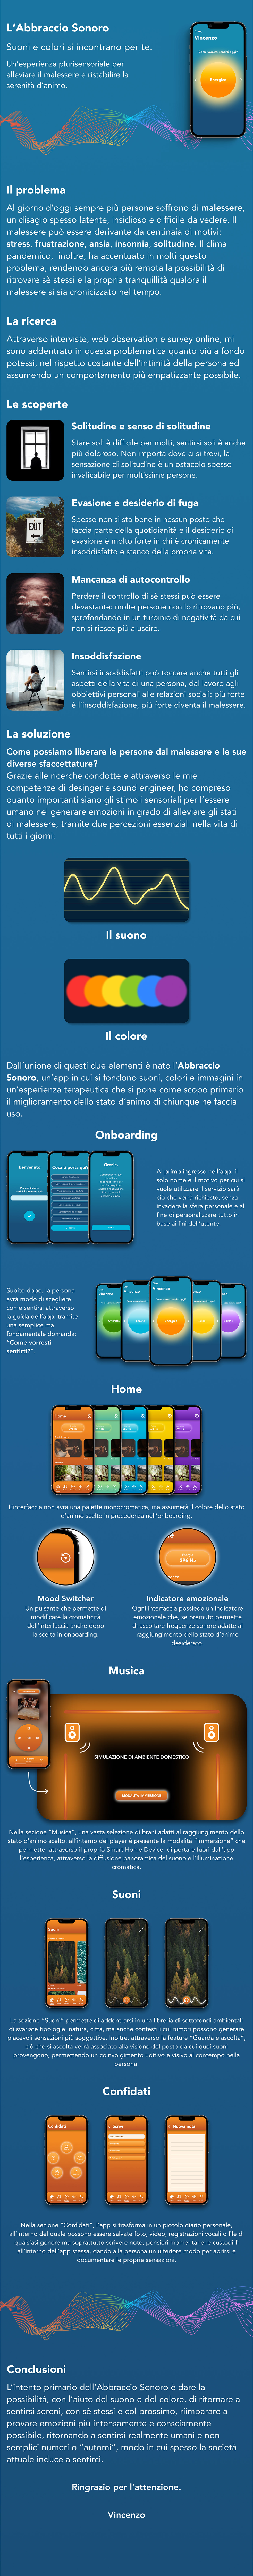 app design Project UI/UX user experience user interface